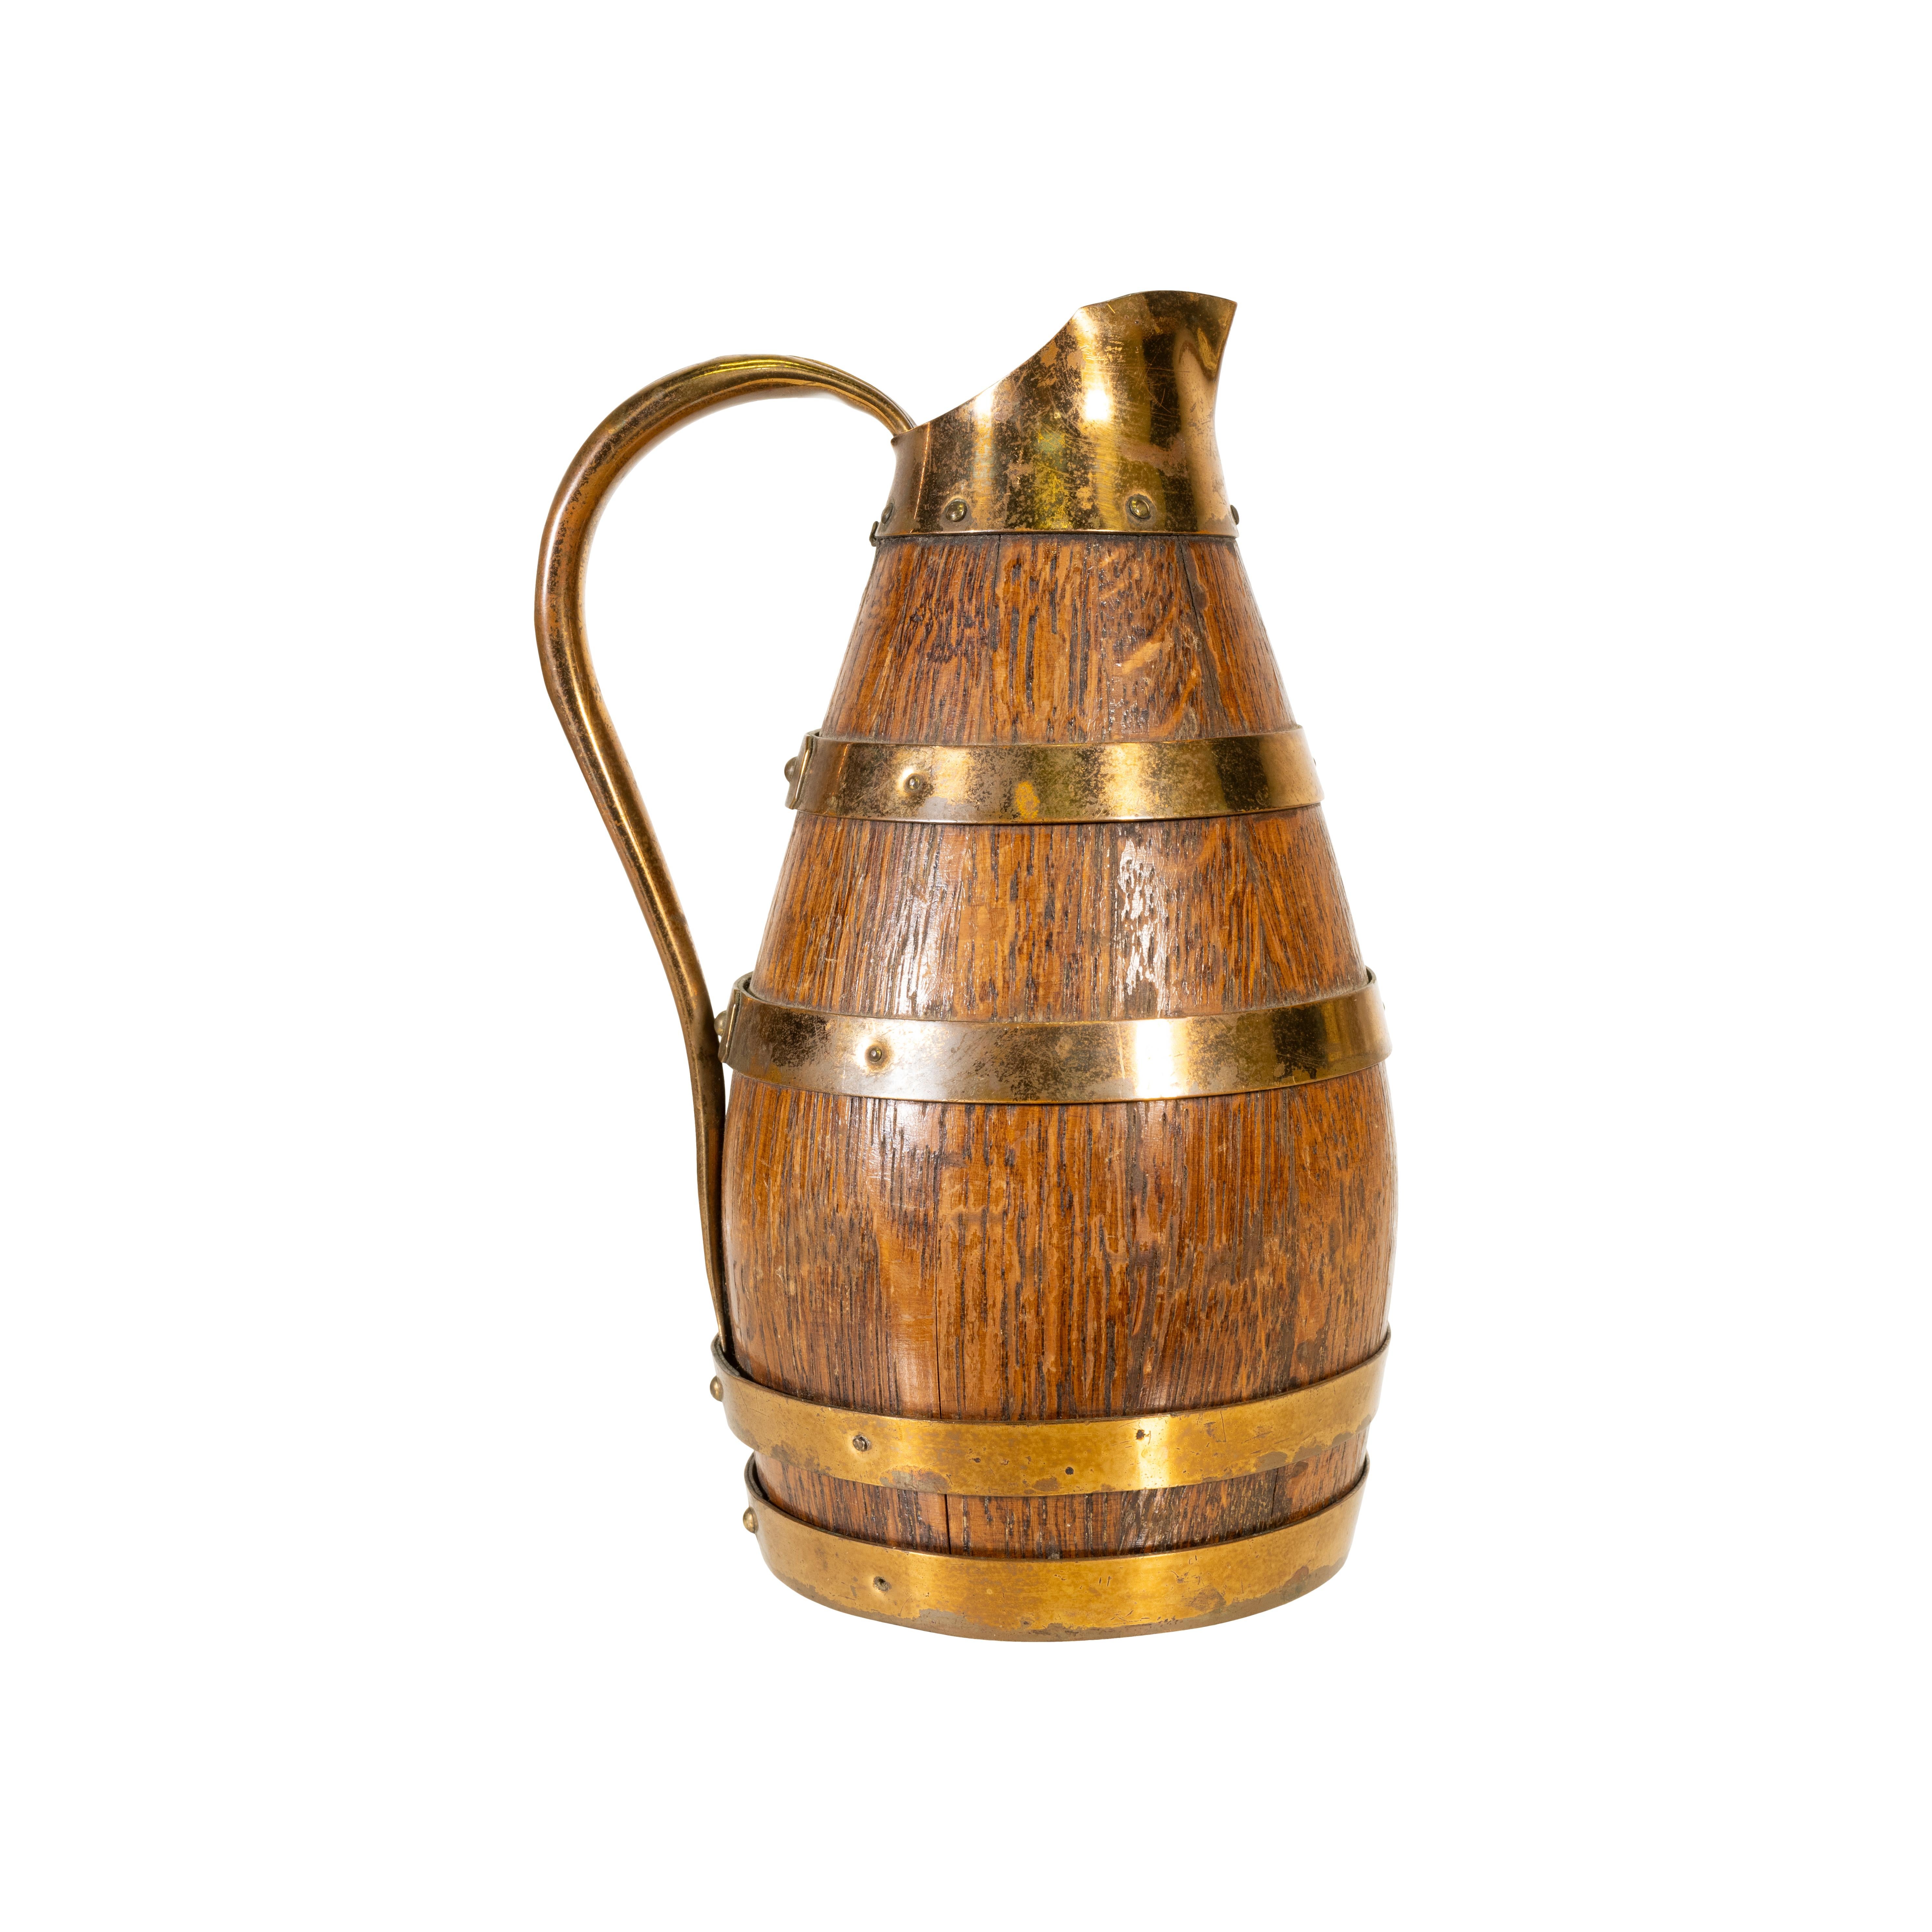 Miniature French Alascian Wine Pitcher In Good Condition For Sale In Coeur d'Alene, ID